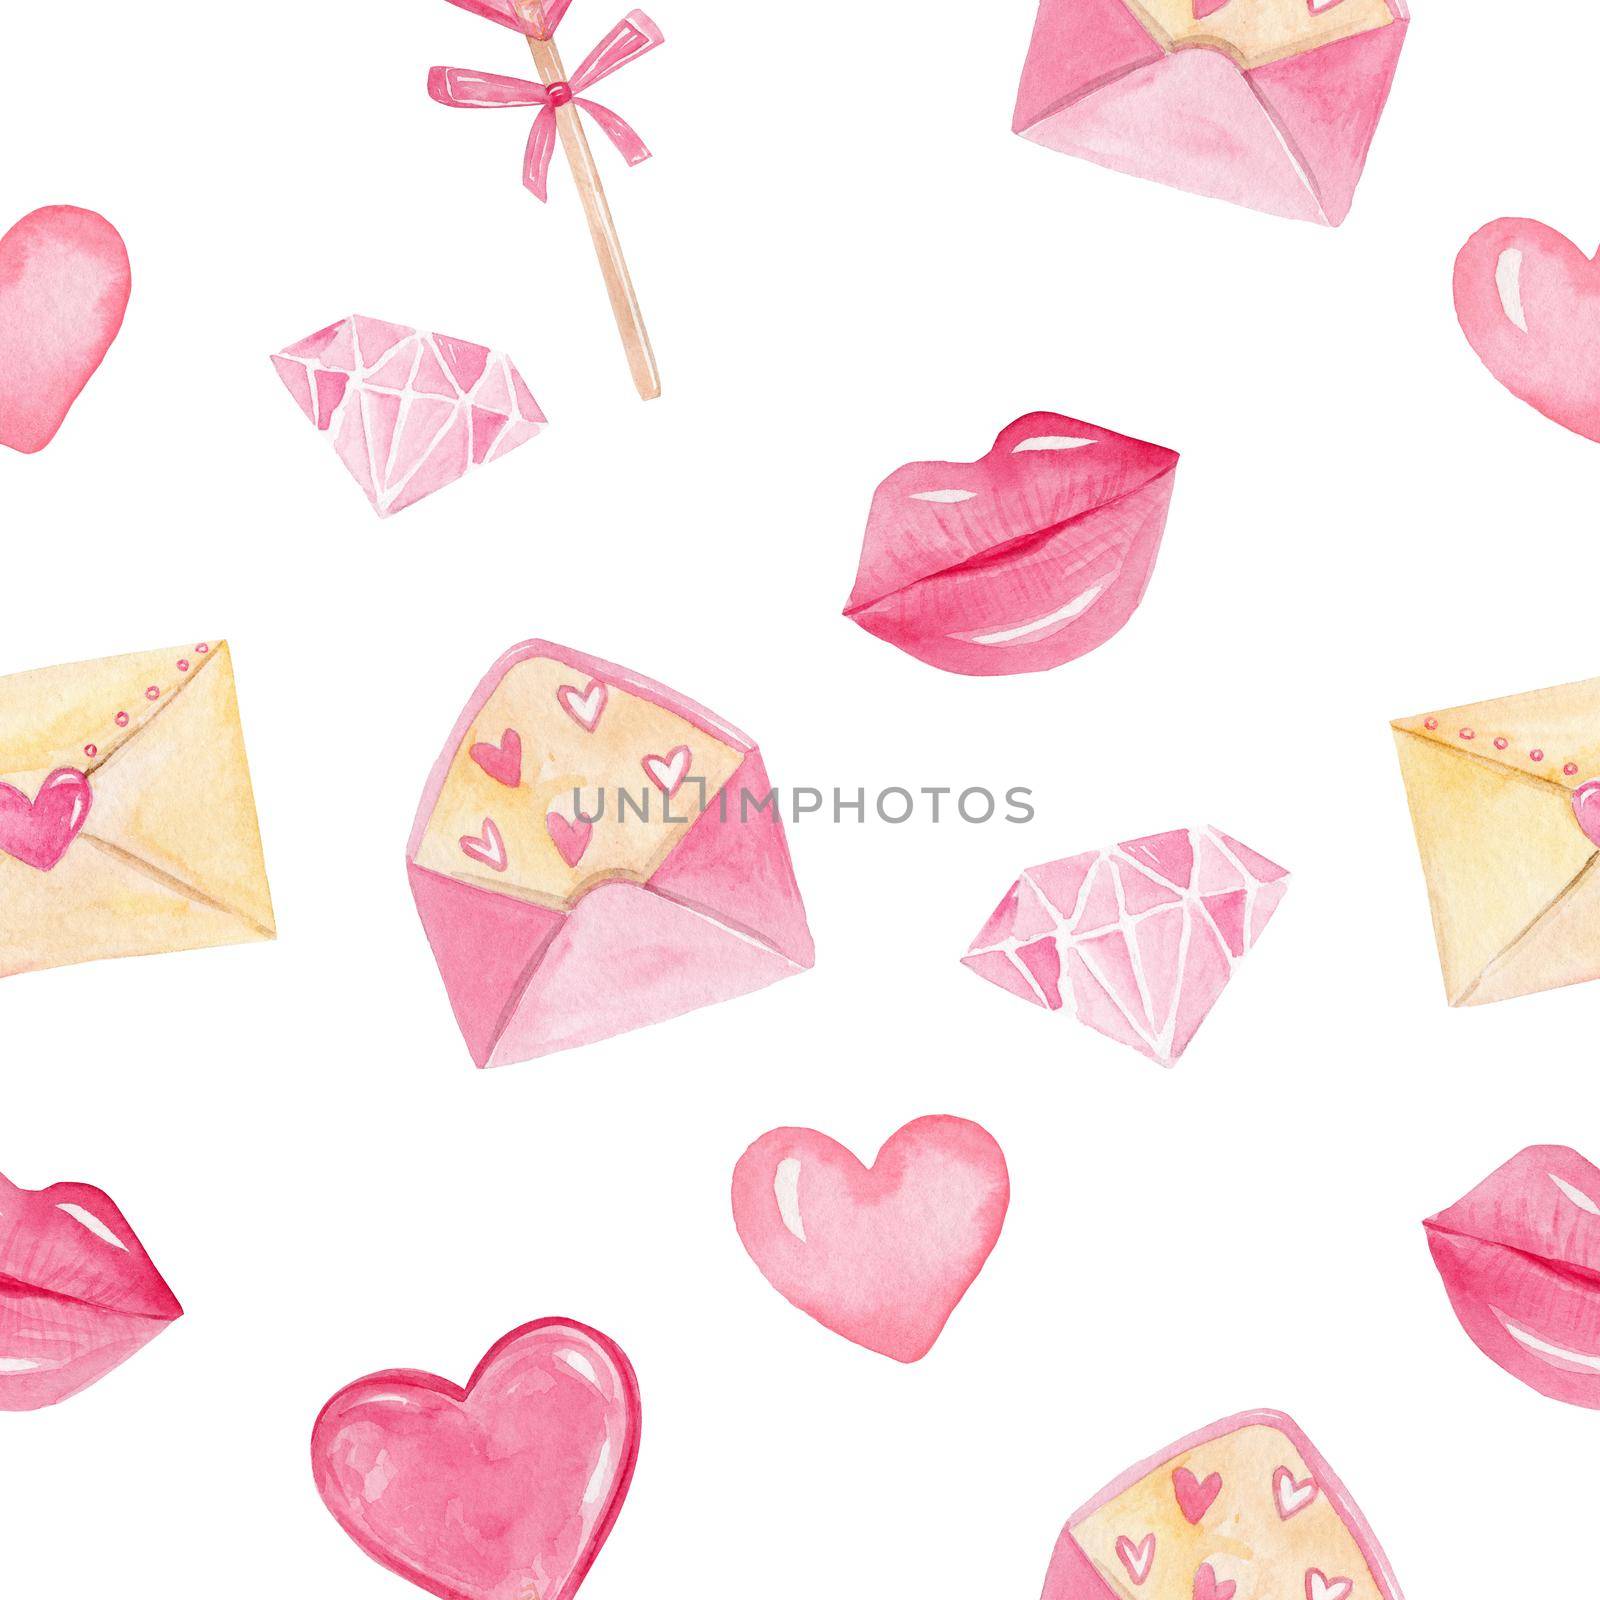 watercolor pink kisses and hearts seamless pattern on white background. Valentines day print with envelopes, diamonds, candy. perfect for fabric, textile, scrapbooking, wrapping paper by dreamloud